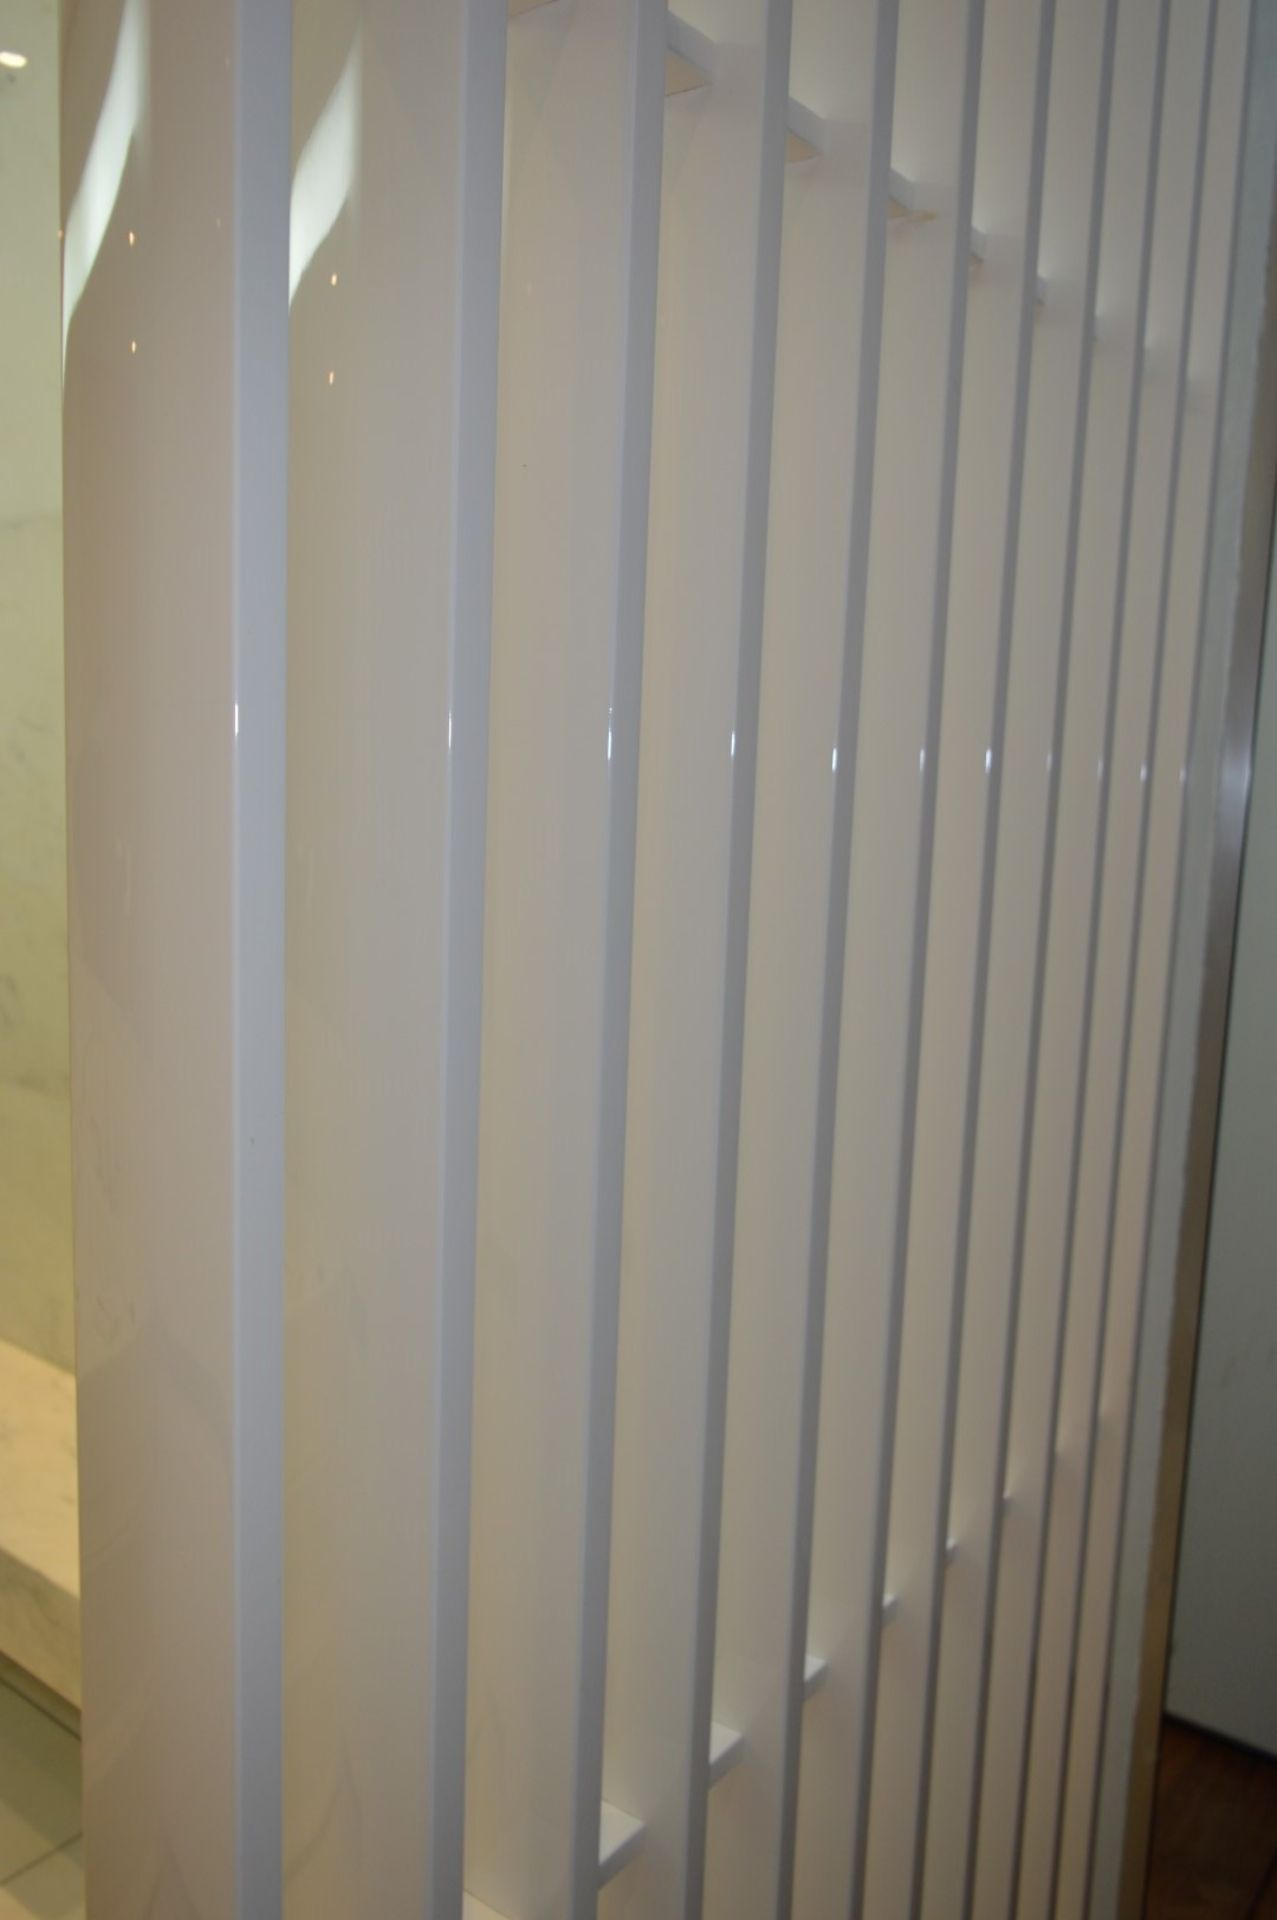 1 x Bathroom Wall Divider - Ref 54 - H262 x W107 x D10 cms - CL230 - Location: London NW8 - NO VAT - Image 4 of 8